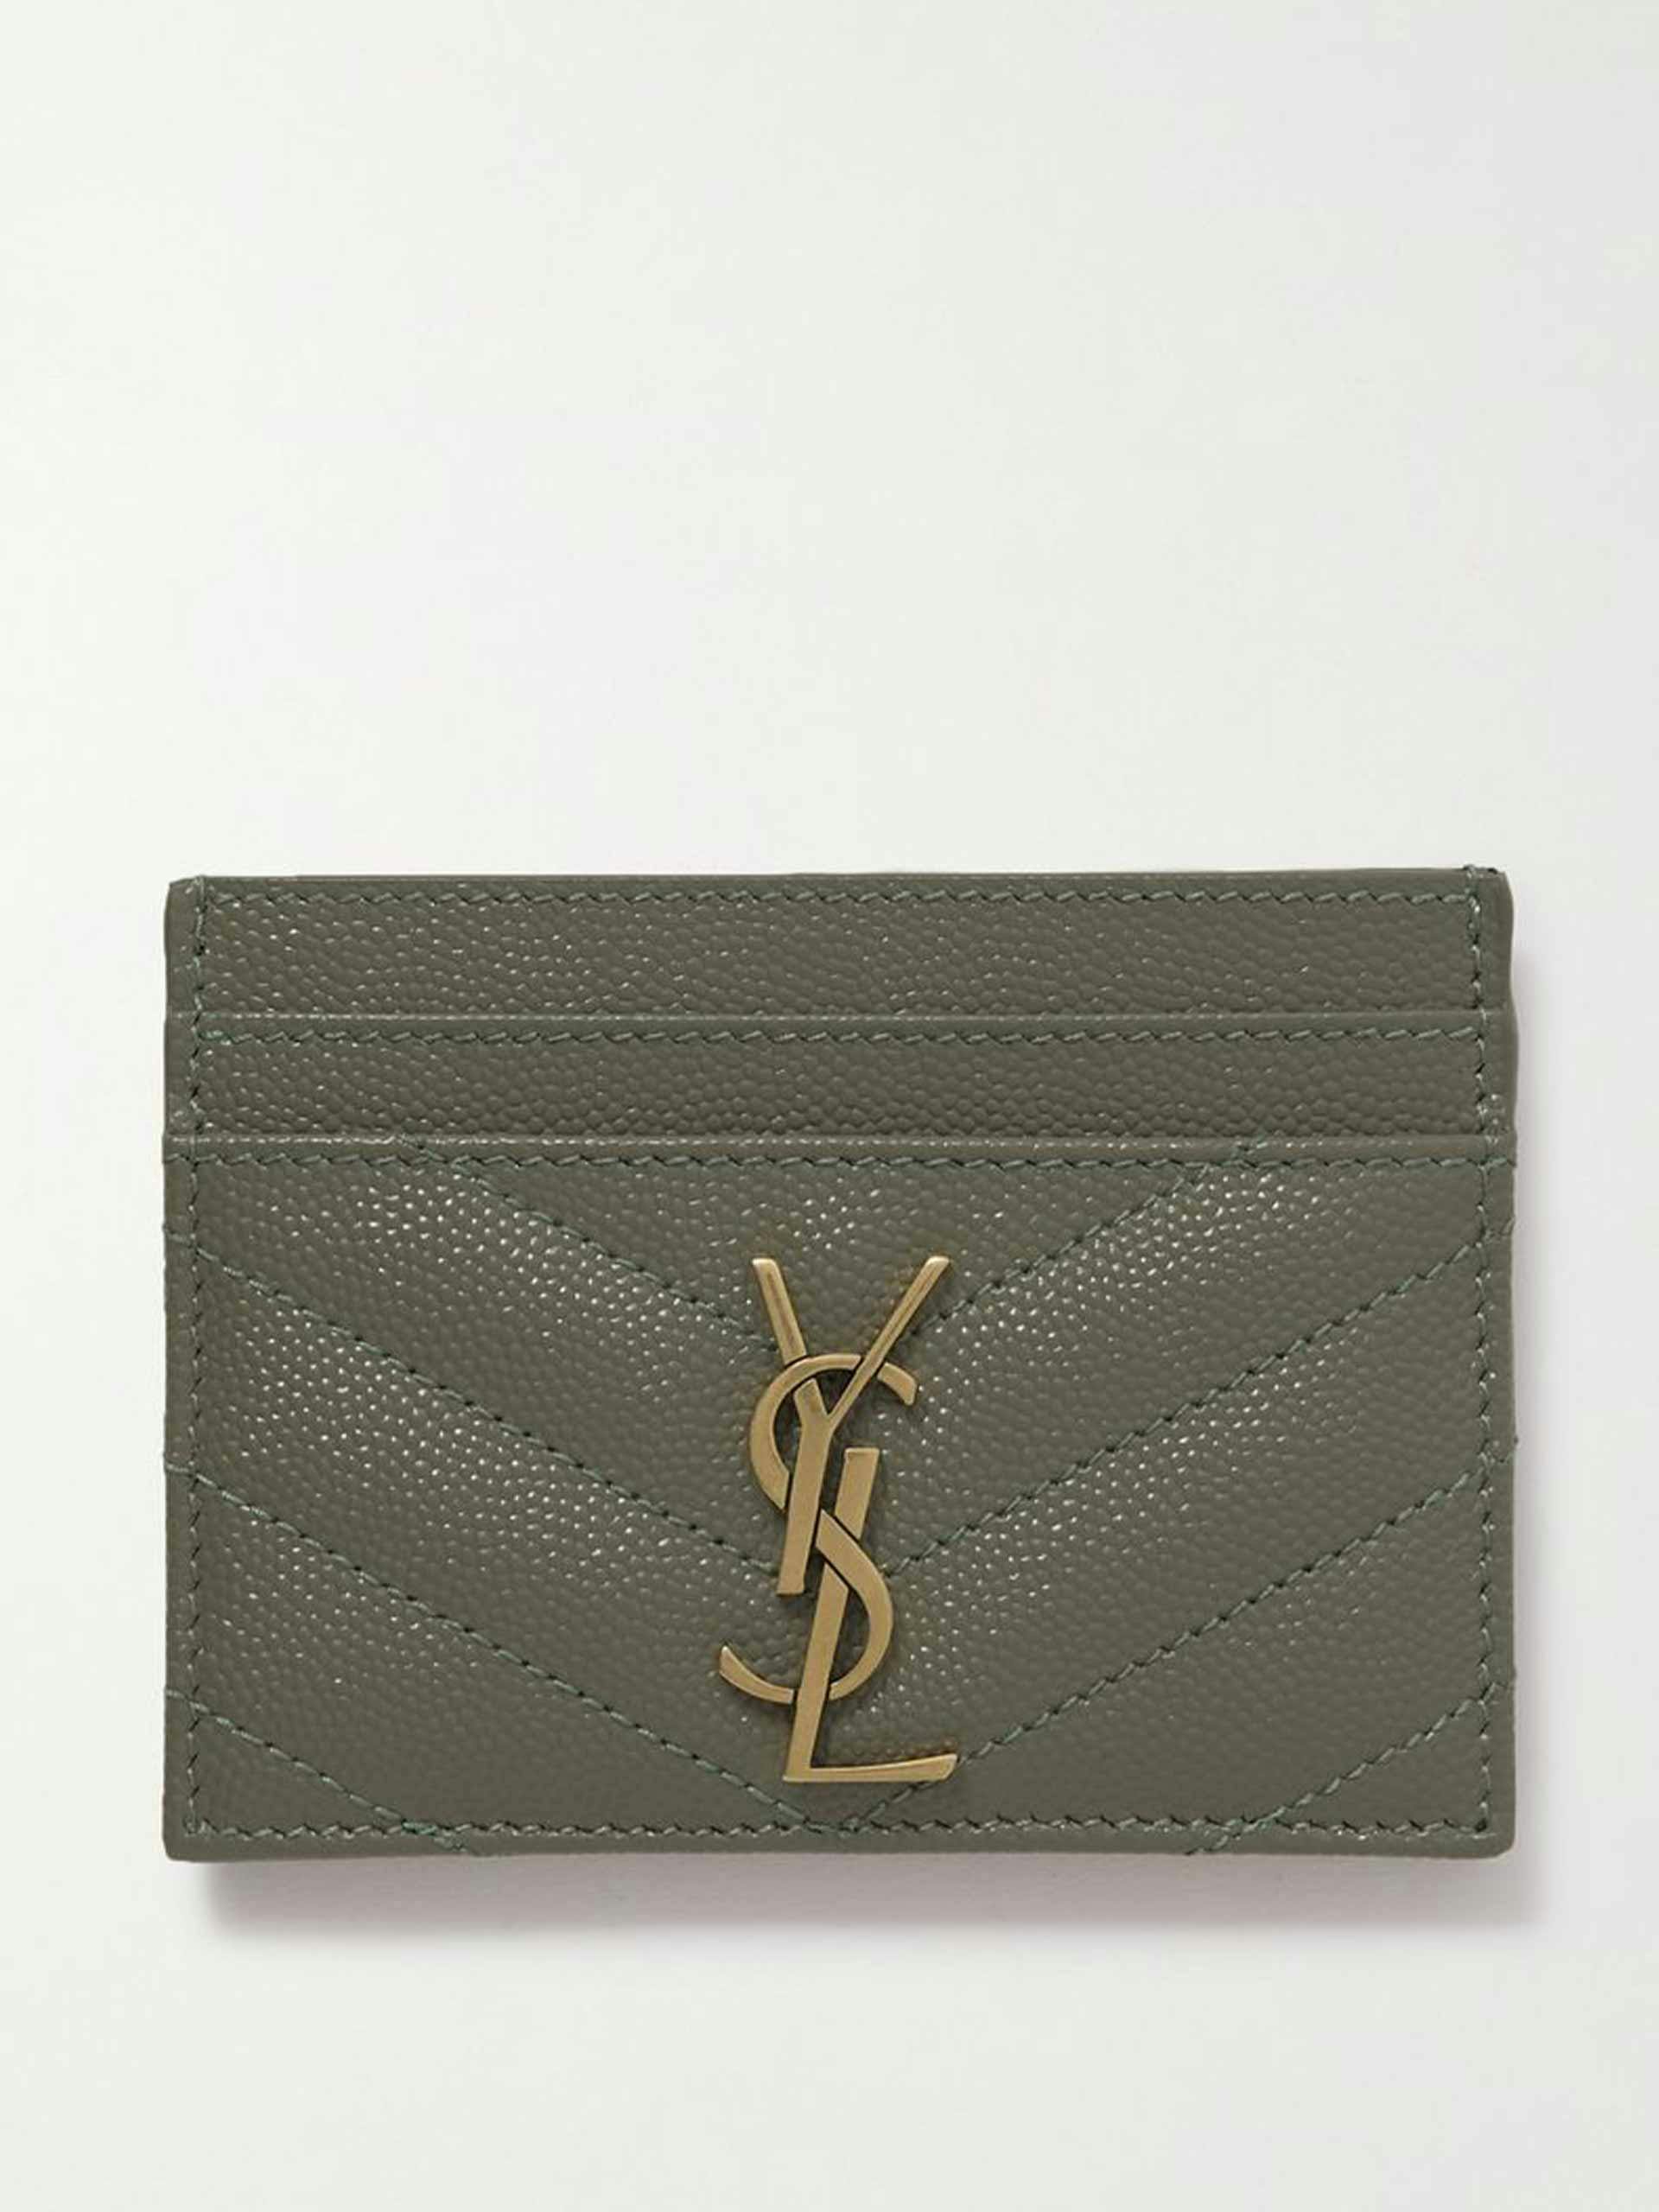 Monogramme quilted textured-leather cardholder